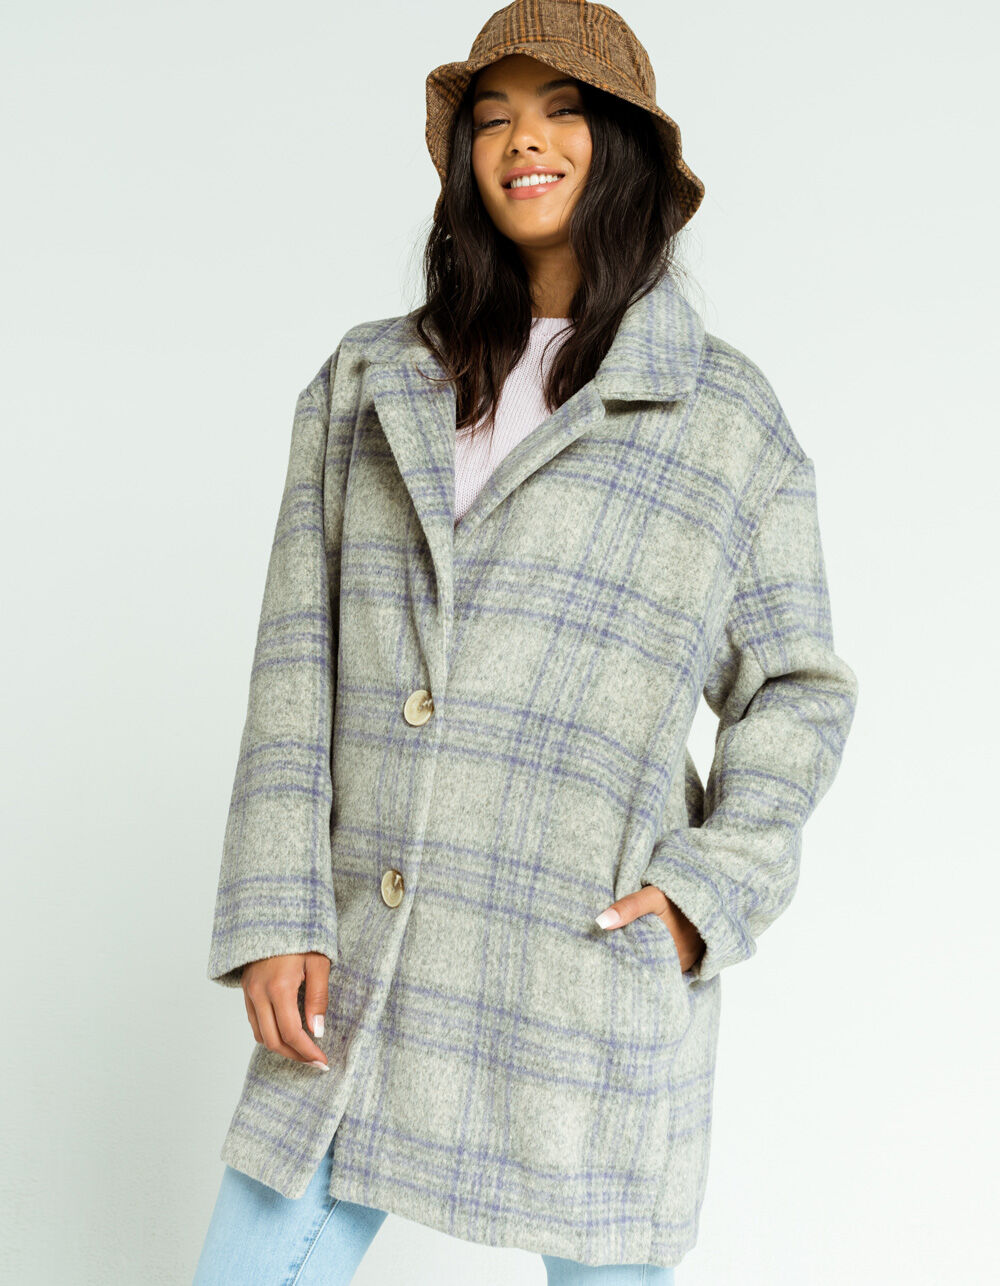 KNOW ONE CARES Plaid Womens Coat - GRAY/LAVENDER | Tillys